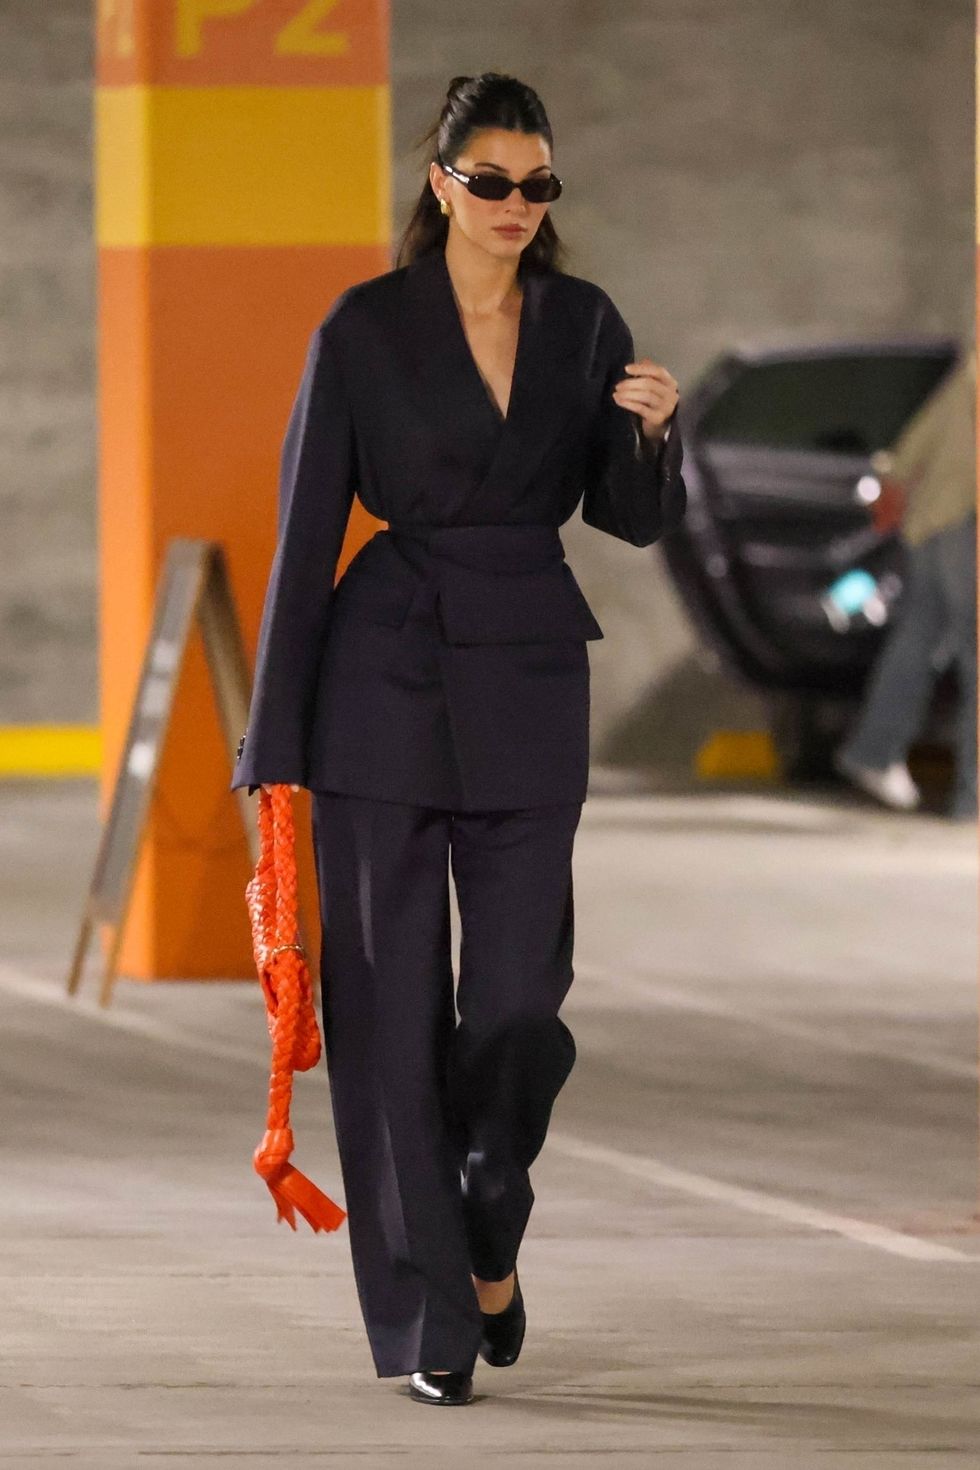 Kendall Jenner Accents Her Quietly Cool Navy Blue Suit With a Bright Orange Bag